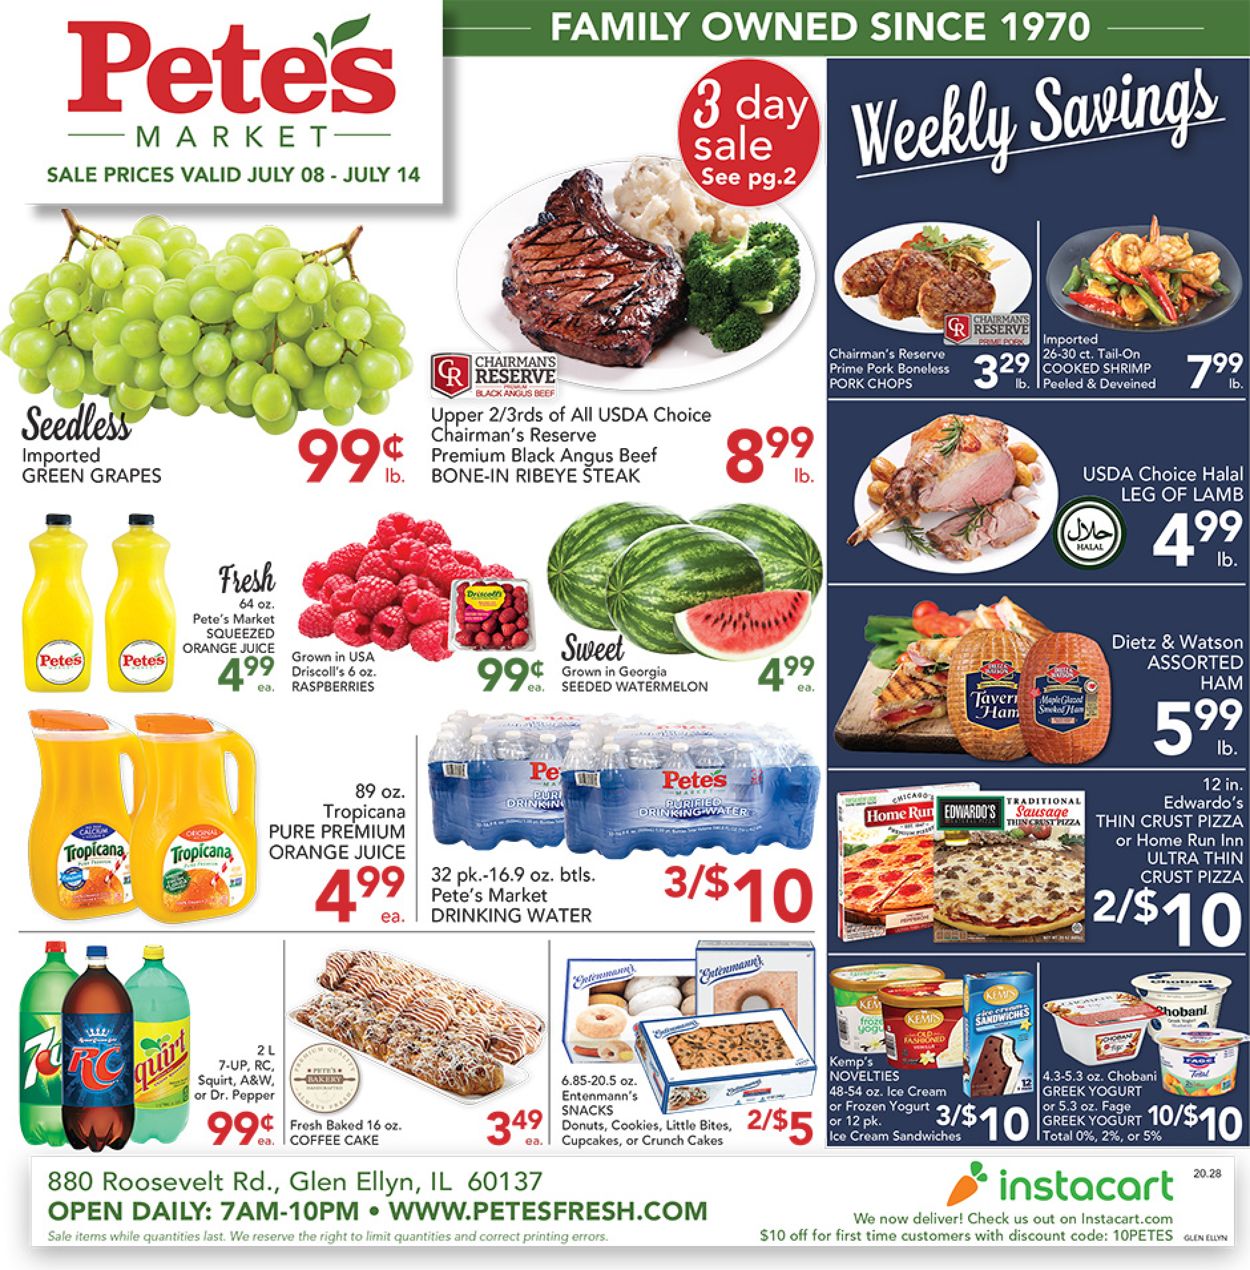 25 Top Photos Pete S Market Weekly Ad / Pete's Fresh Market Current weekly ad 10/16 - 10/22/2019 ...